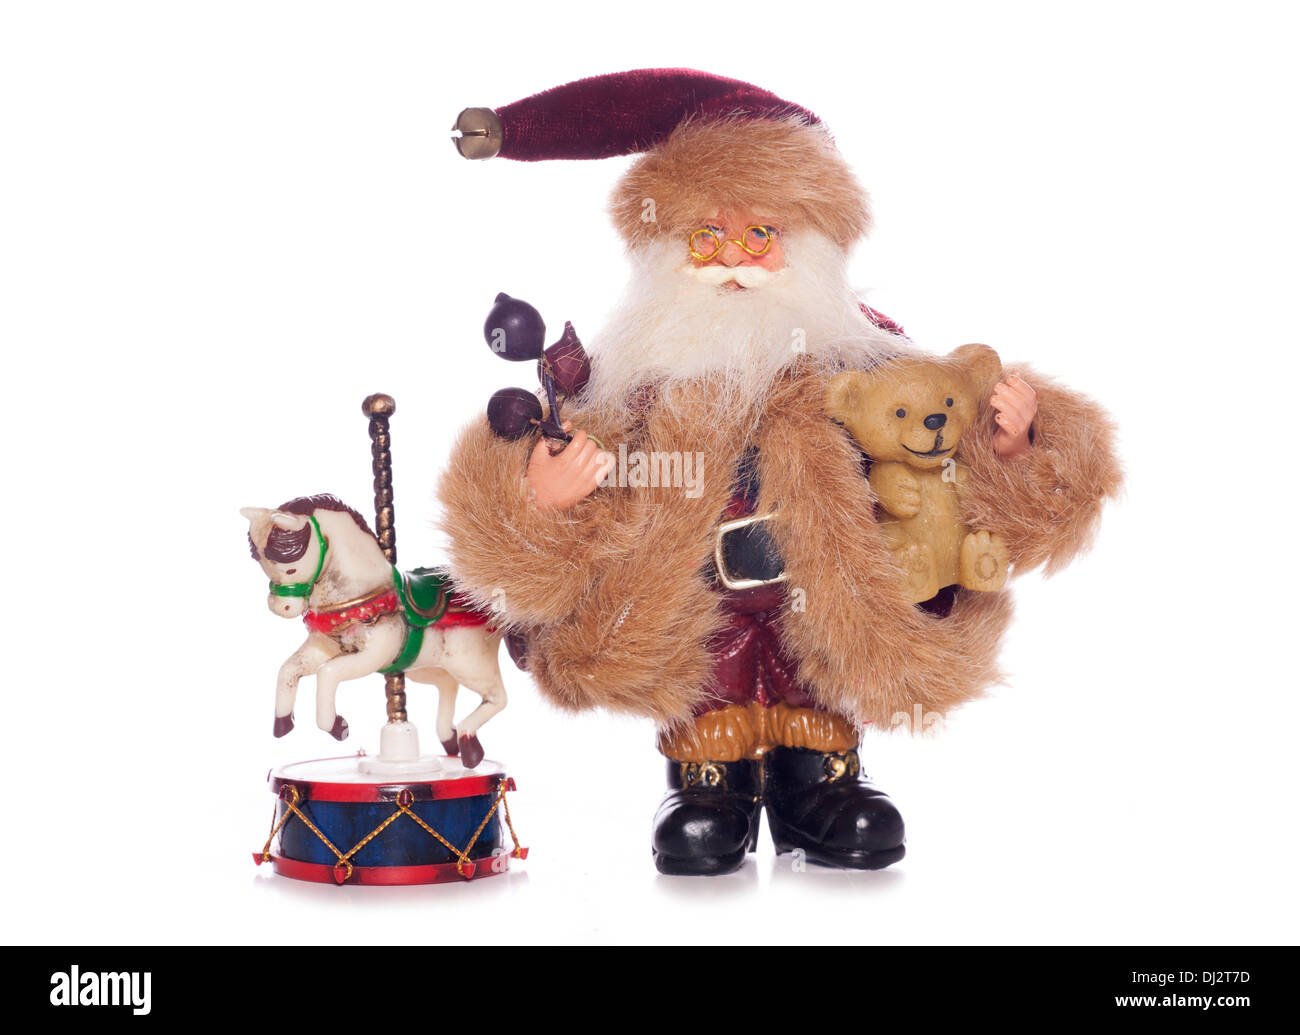 Vintage father christmas with old toys cutout Stock Photo